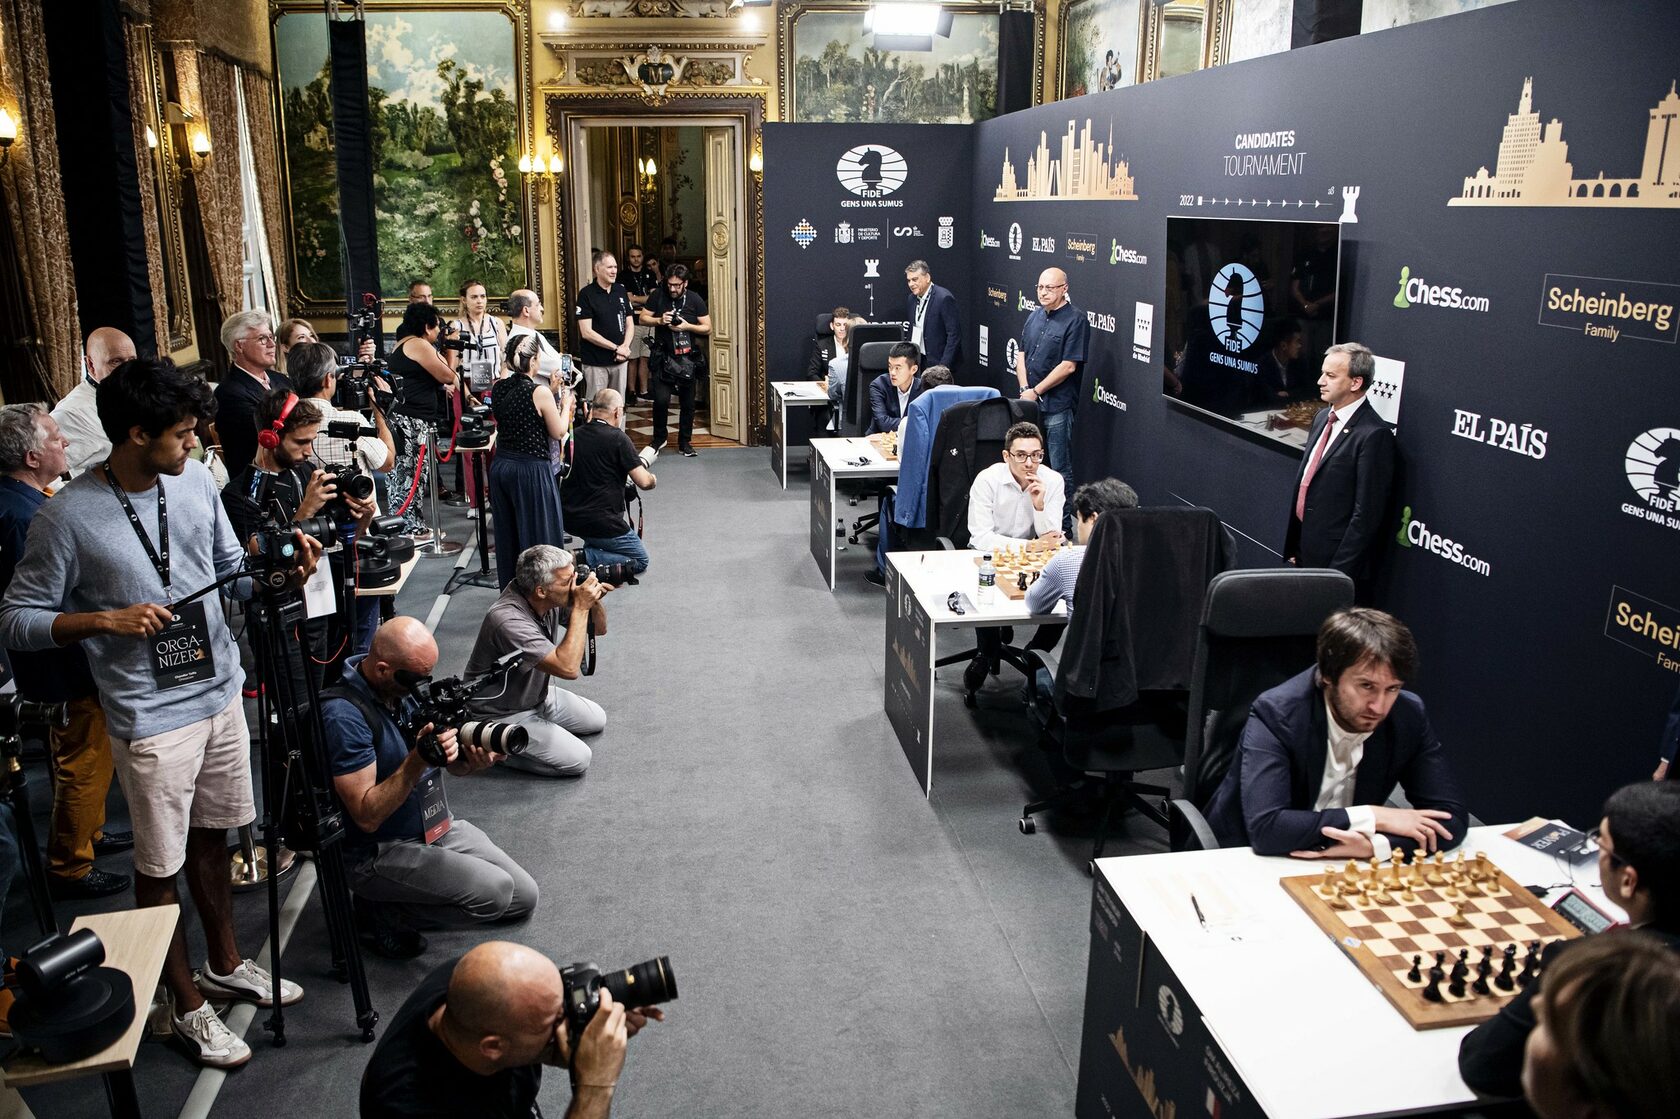 Nepomniachtchi and Caruana Won In Round 6 of the Candidates 2022